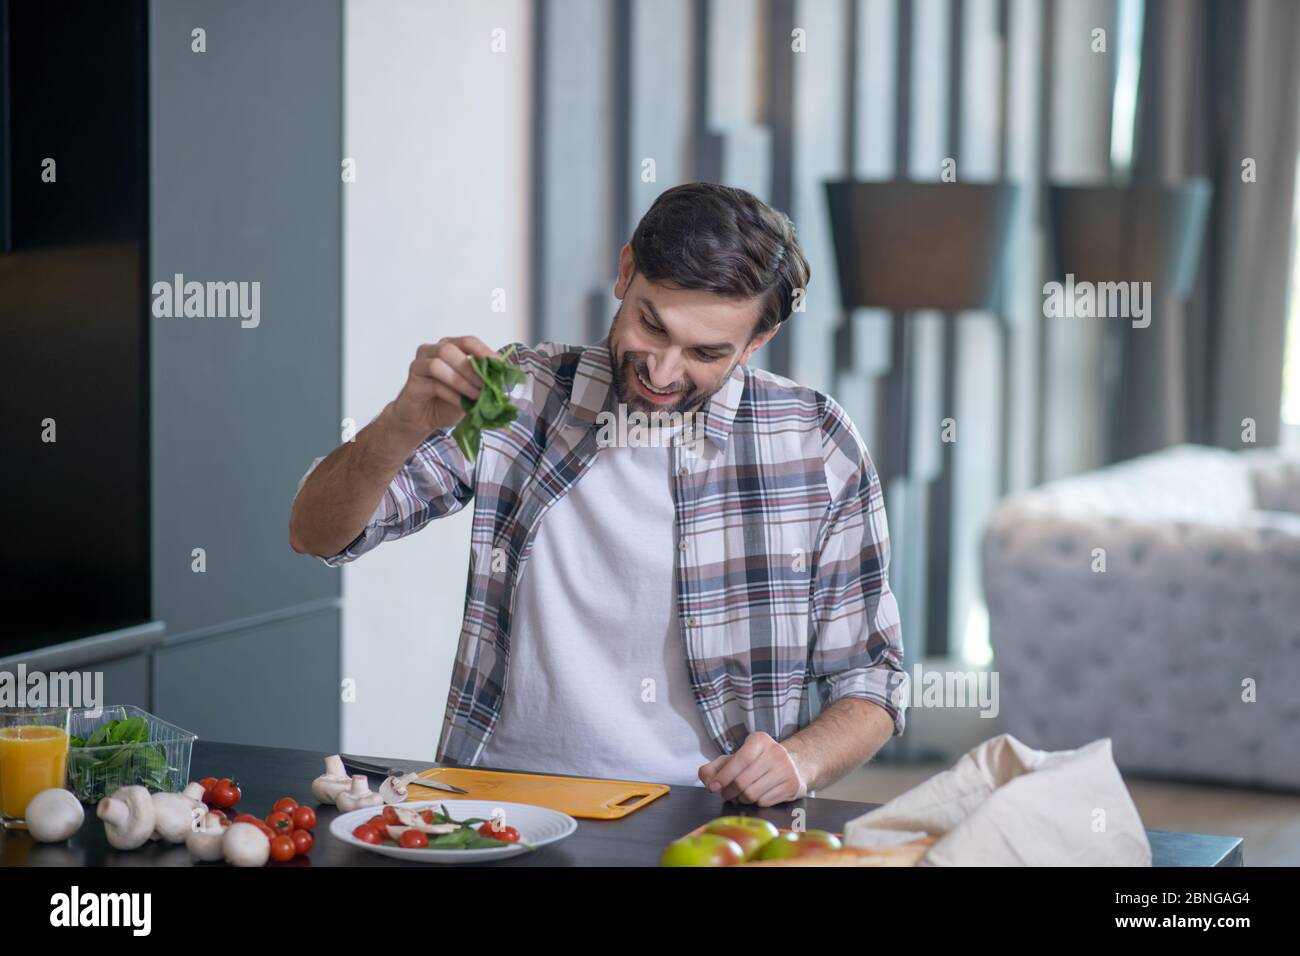 Man holding hand with arugula leaves over a plate with vegetables Stock Photo